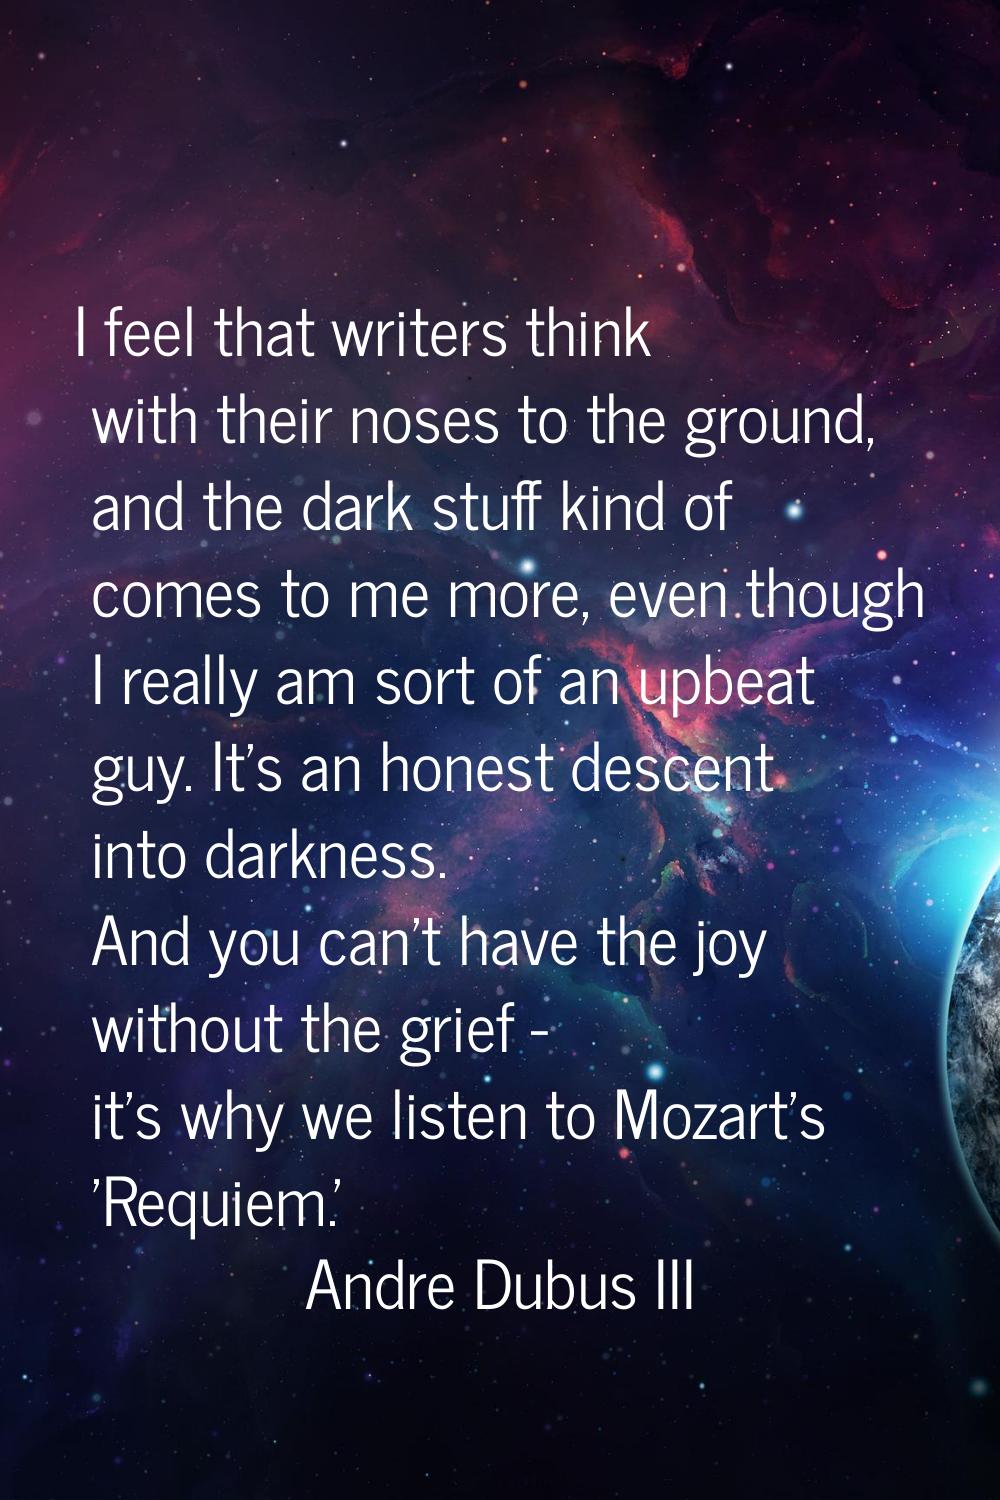 I feel that writers think with their noses to the ground, and the dark stuff kind of comes to me mo